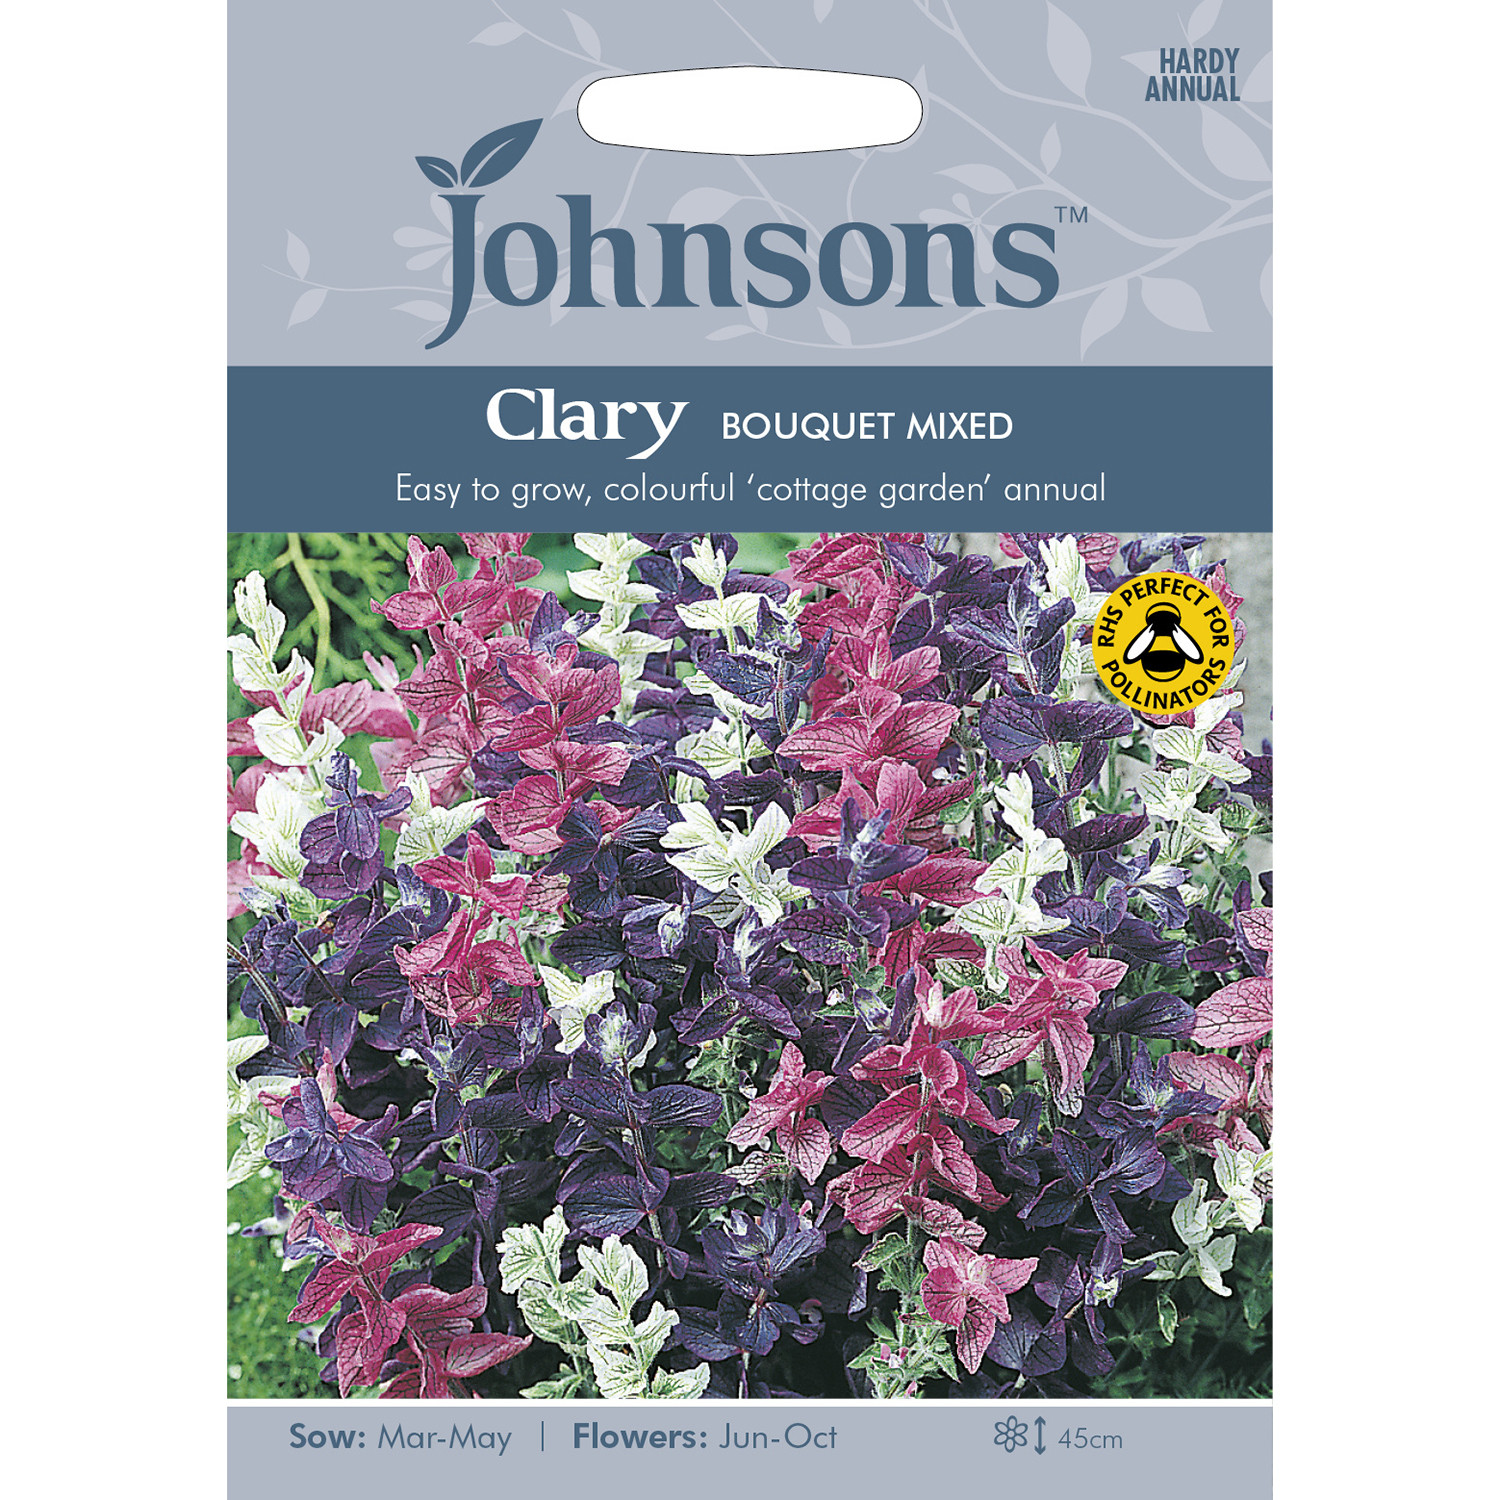 Johnsons Clary Bouquet Mixed Flower Seeds Image 2